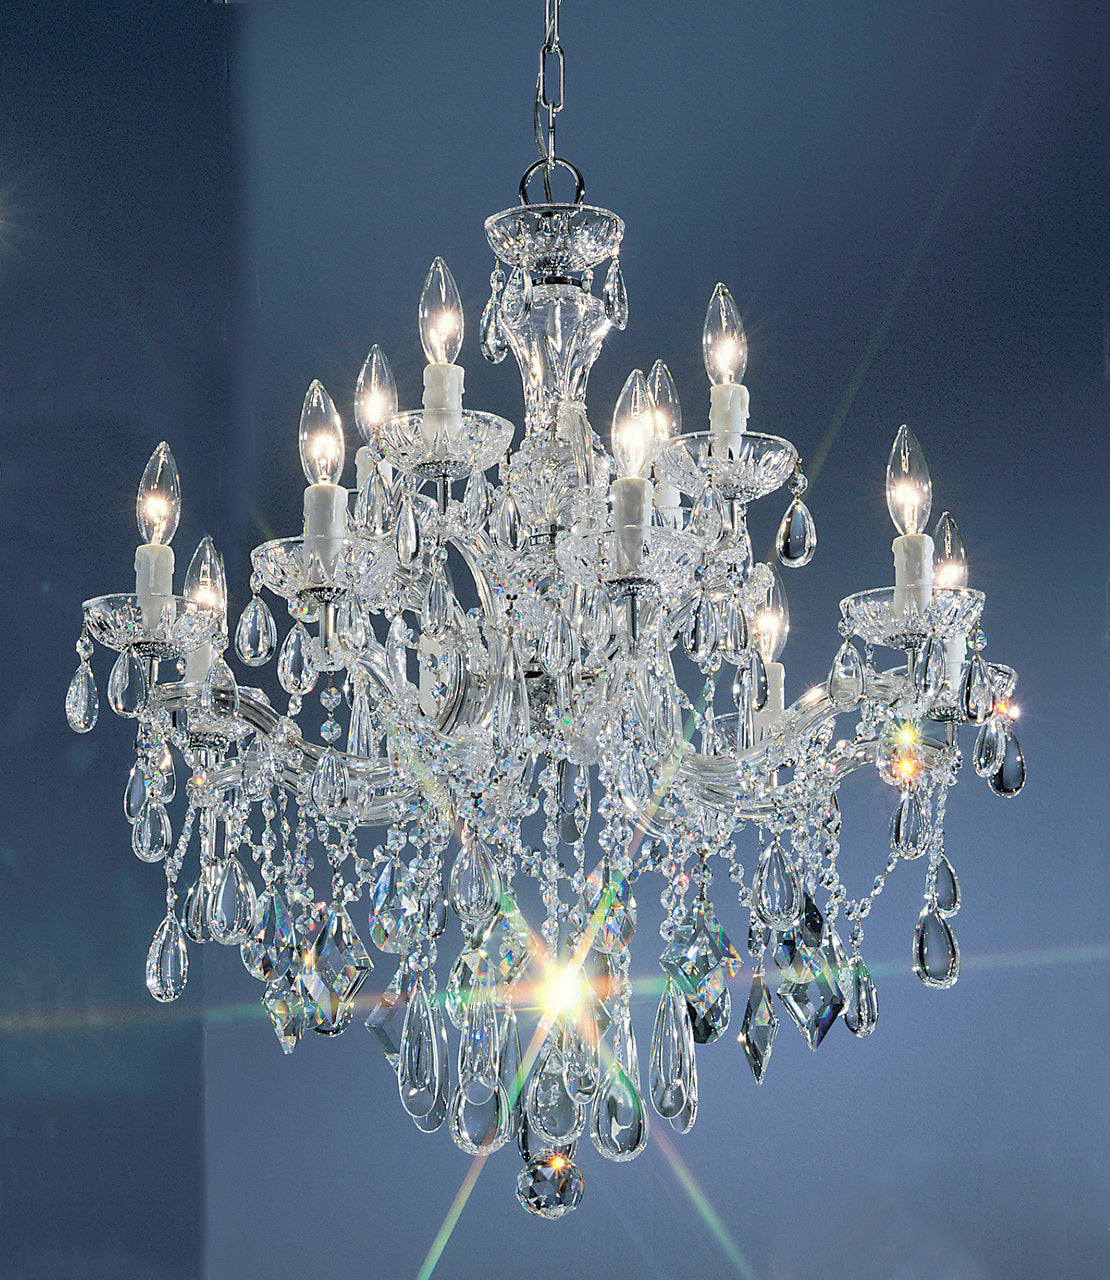 Classic Lighting 8354 CH C Rialto Contemporary Crystal Chandelier in Chrome